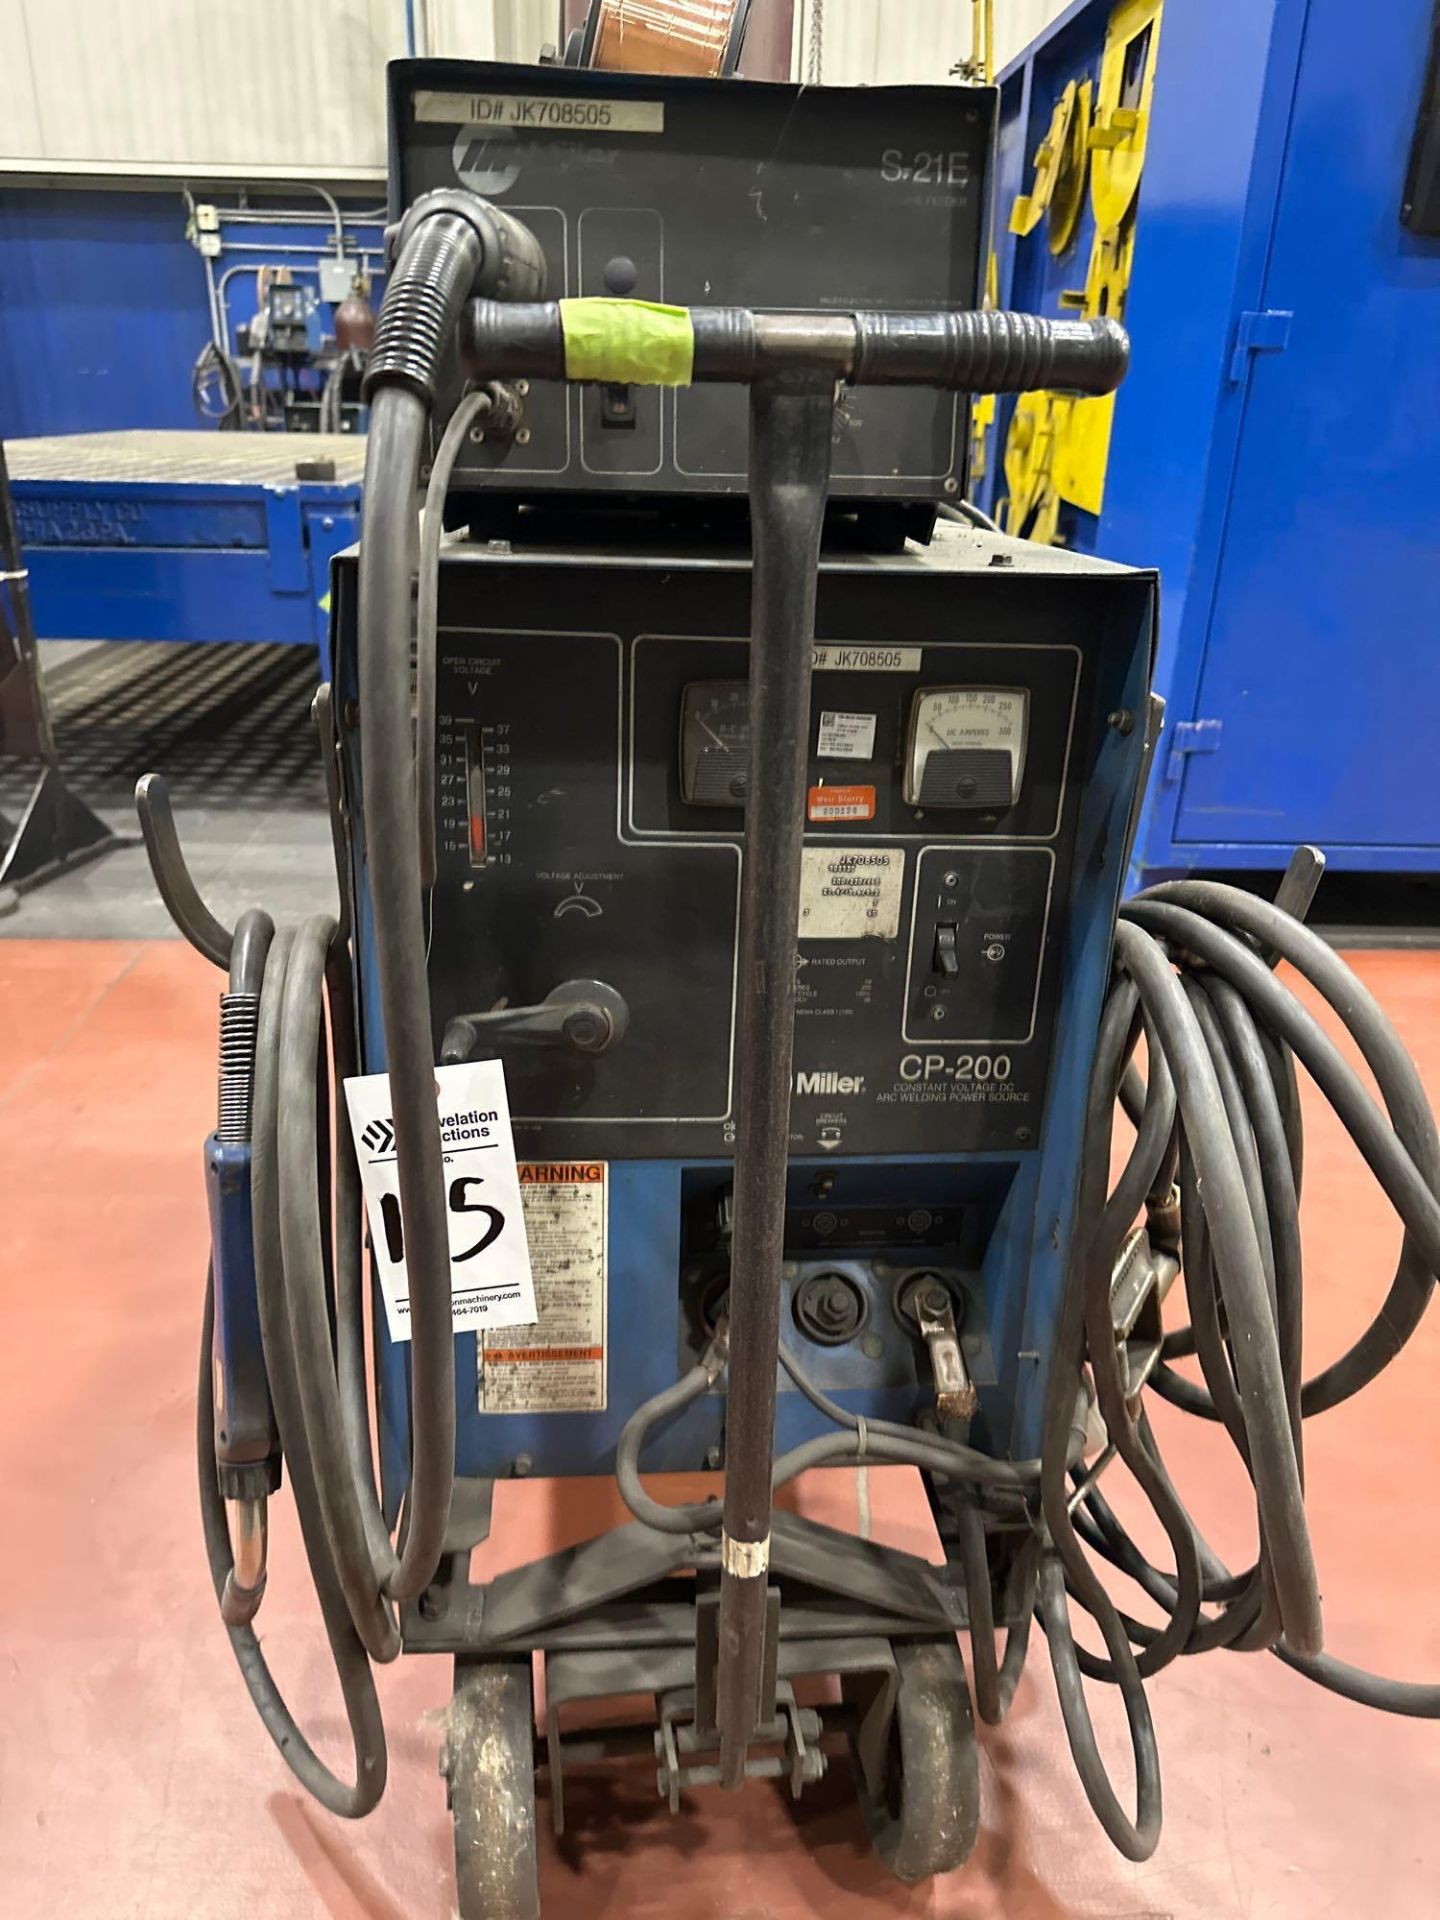 MILLER CP-200 MIG WELDER WITH S-21E WIRE FEEDER - Image 3 of 7